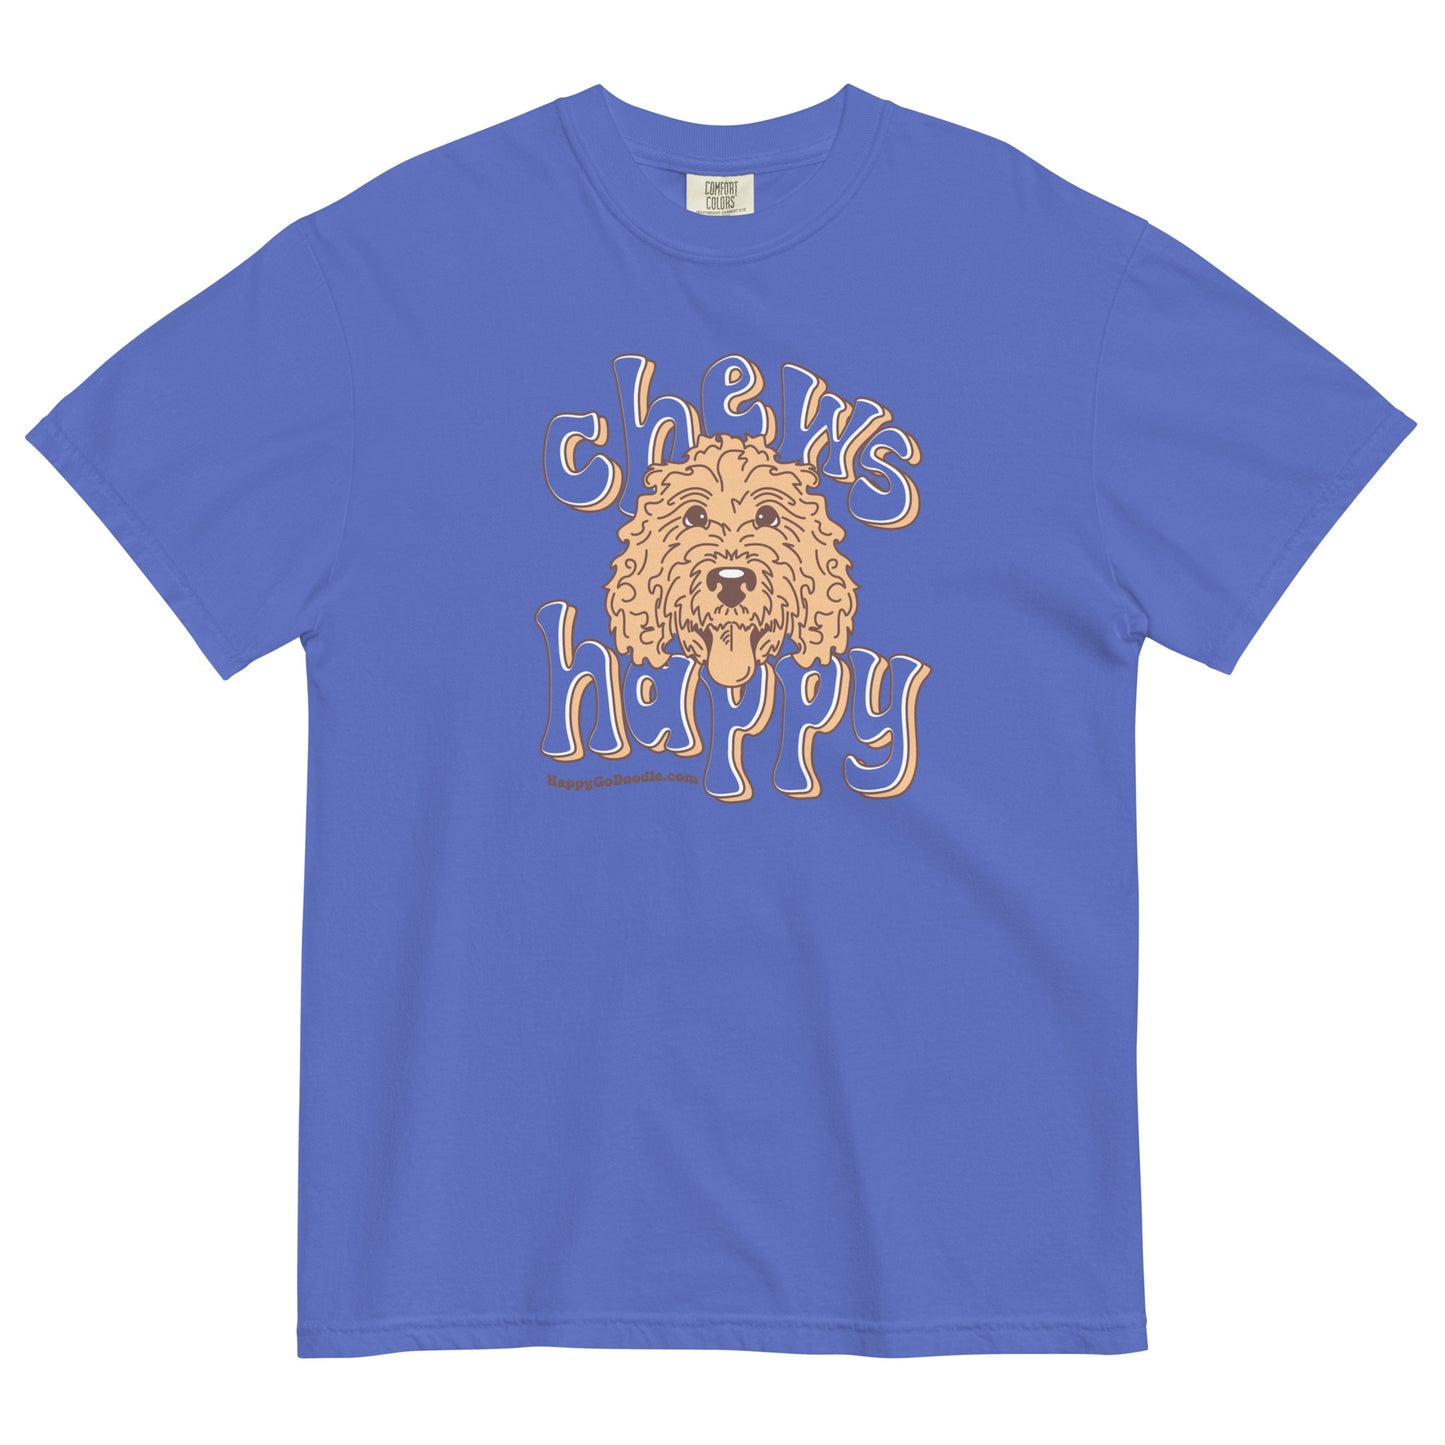 Goldendoodle comfort colors t-shirt with Goldendoodle face and words "Chews Happy" in flo blue color